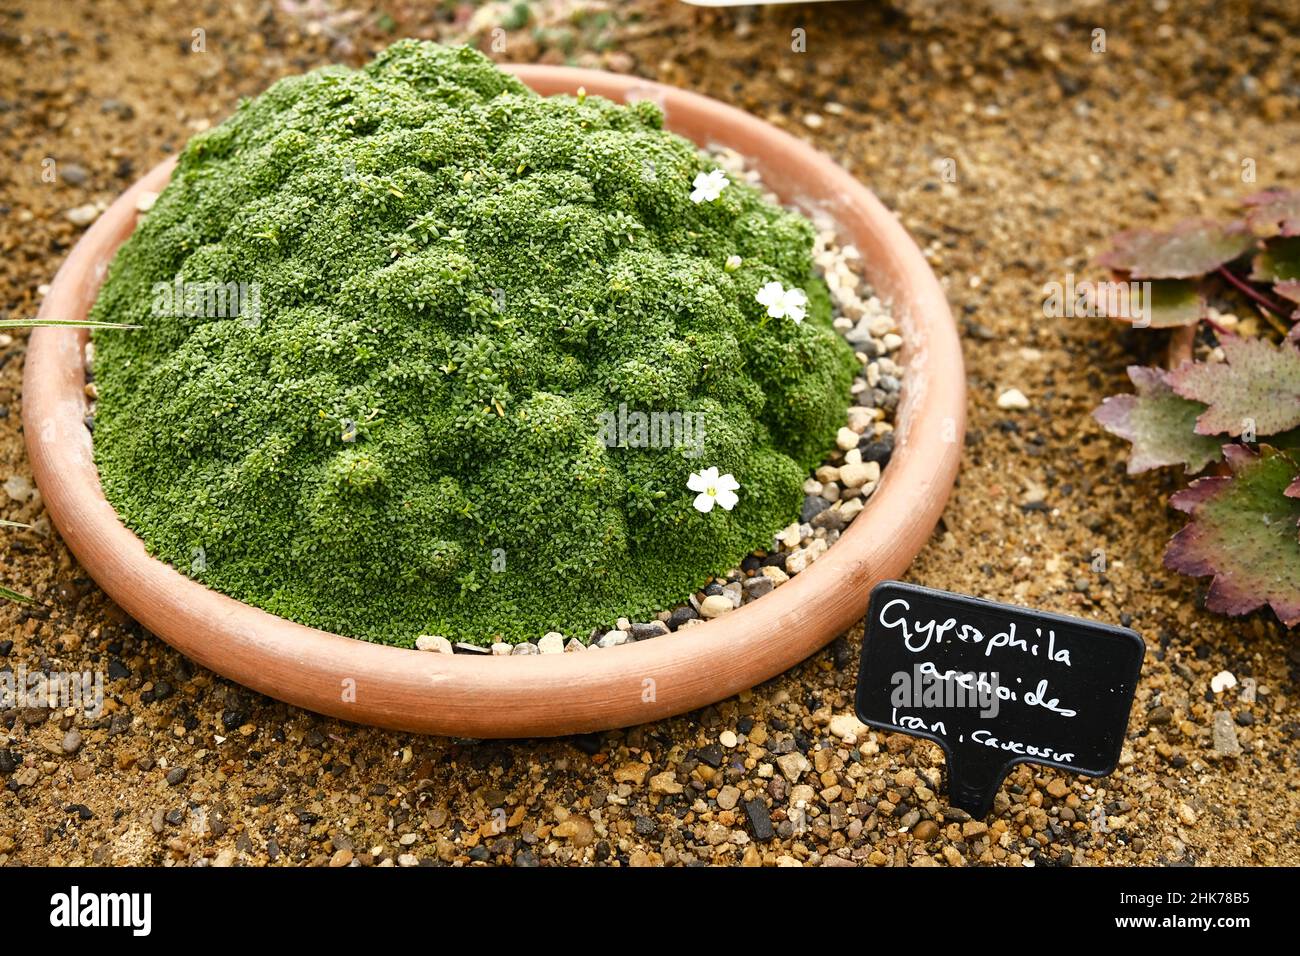 Gypsophila Aretioides growing in a container of gravel in a glasshouse, labeled. Stock Photo